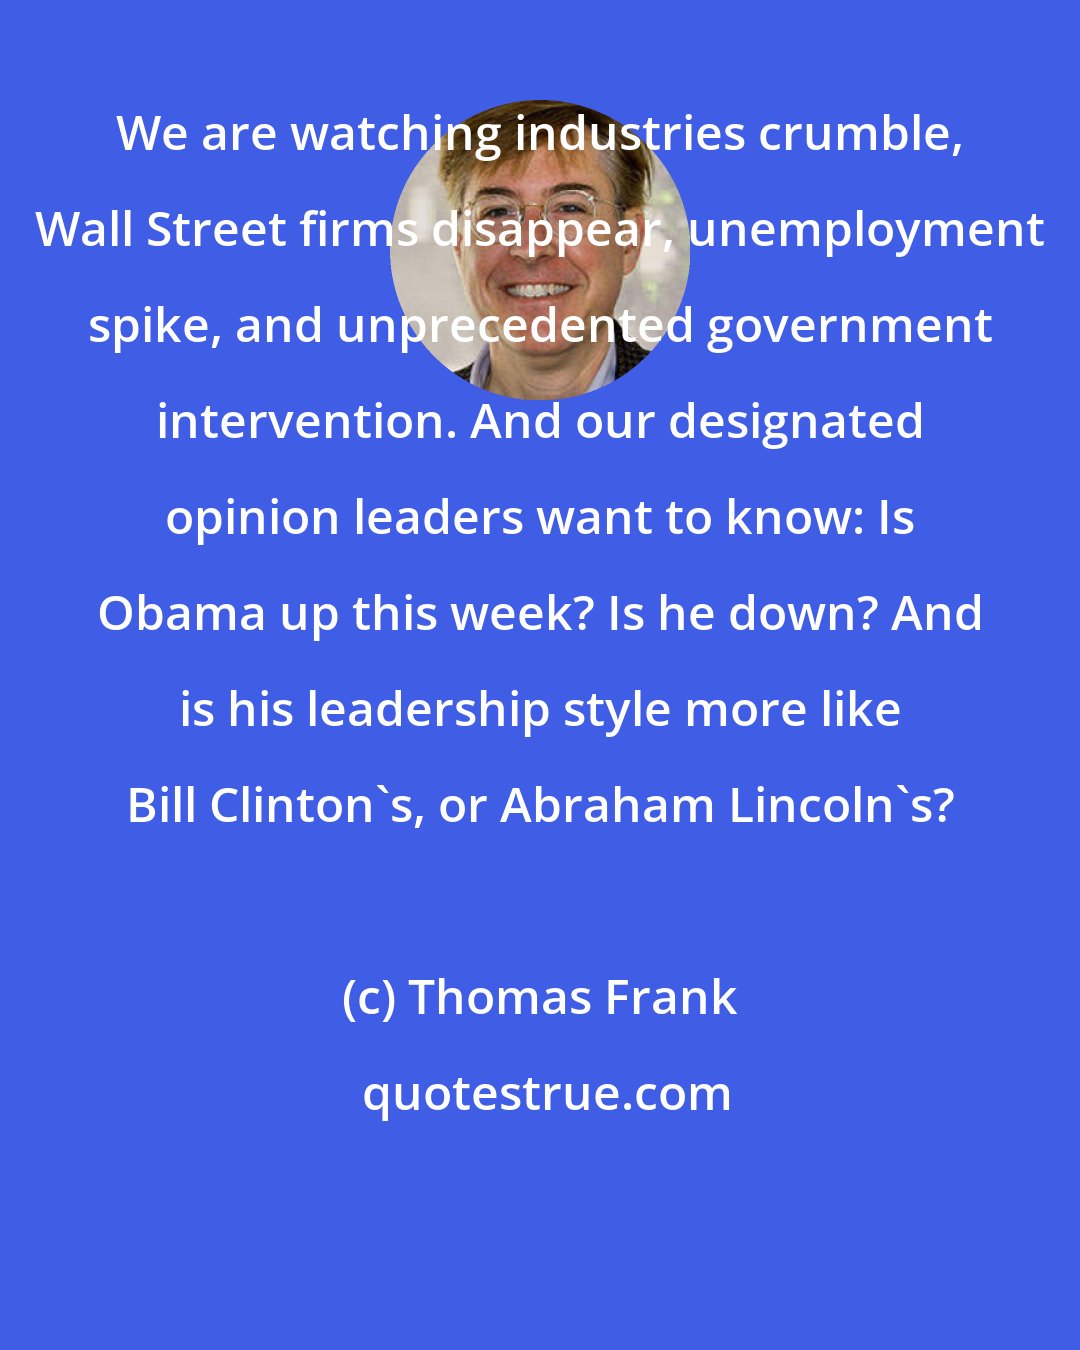 Thomas Frank: We are watching industries crumble, Wall Street firms disappear, unemployment spike, and unprecedented government intervention. And our designated opinion leaders want to know: Is Obama up this week? Is he down? And is his leadership style more like Bill Clinton's, or Abraham Lincoln's?